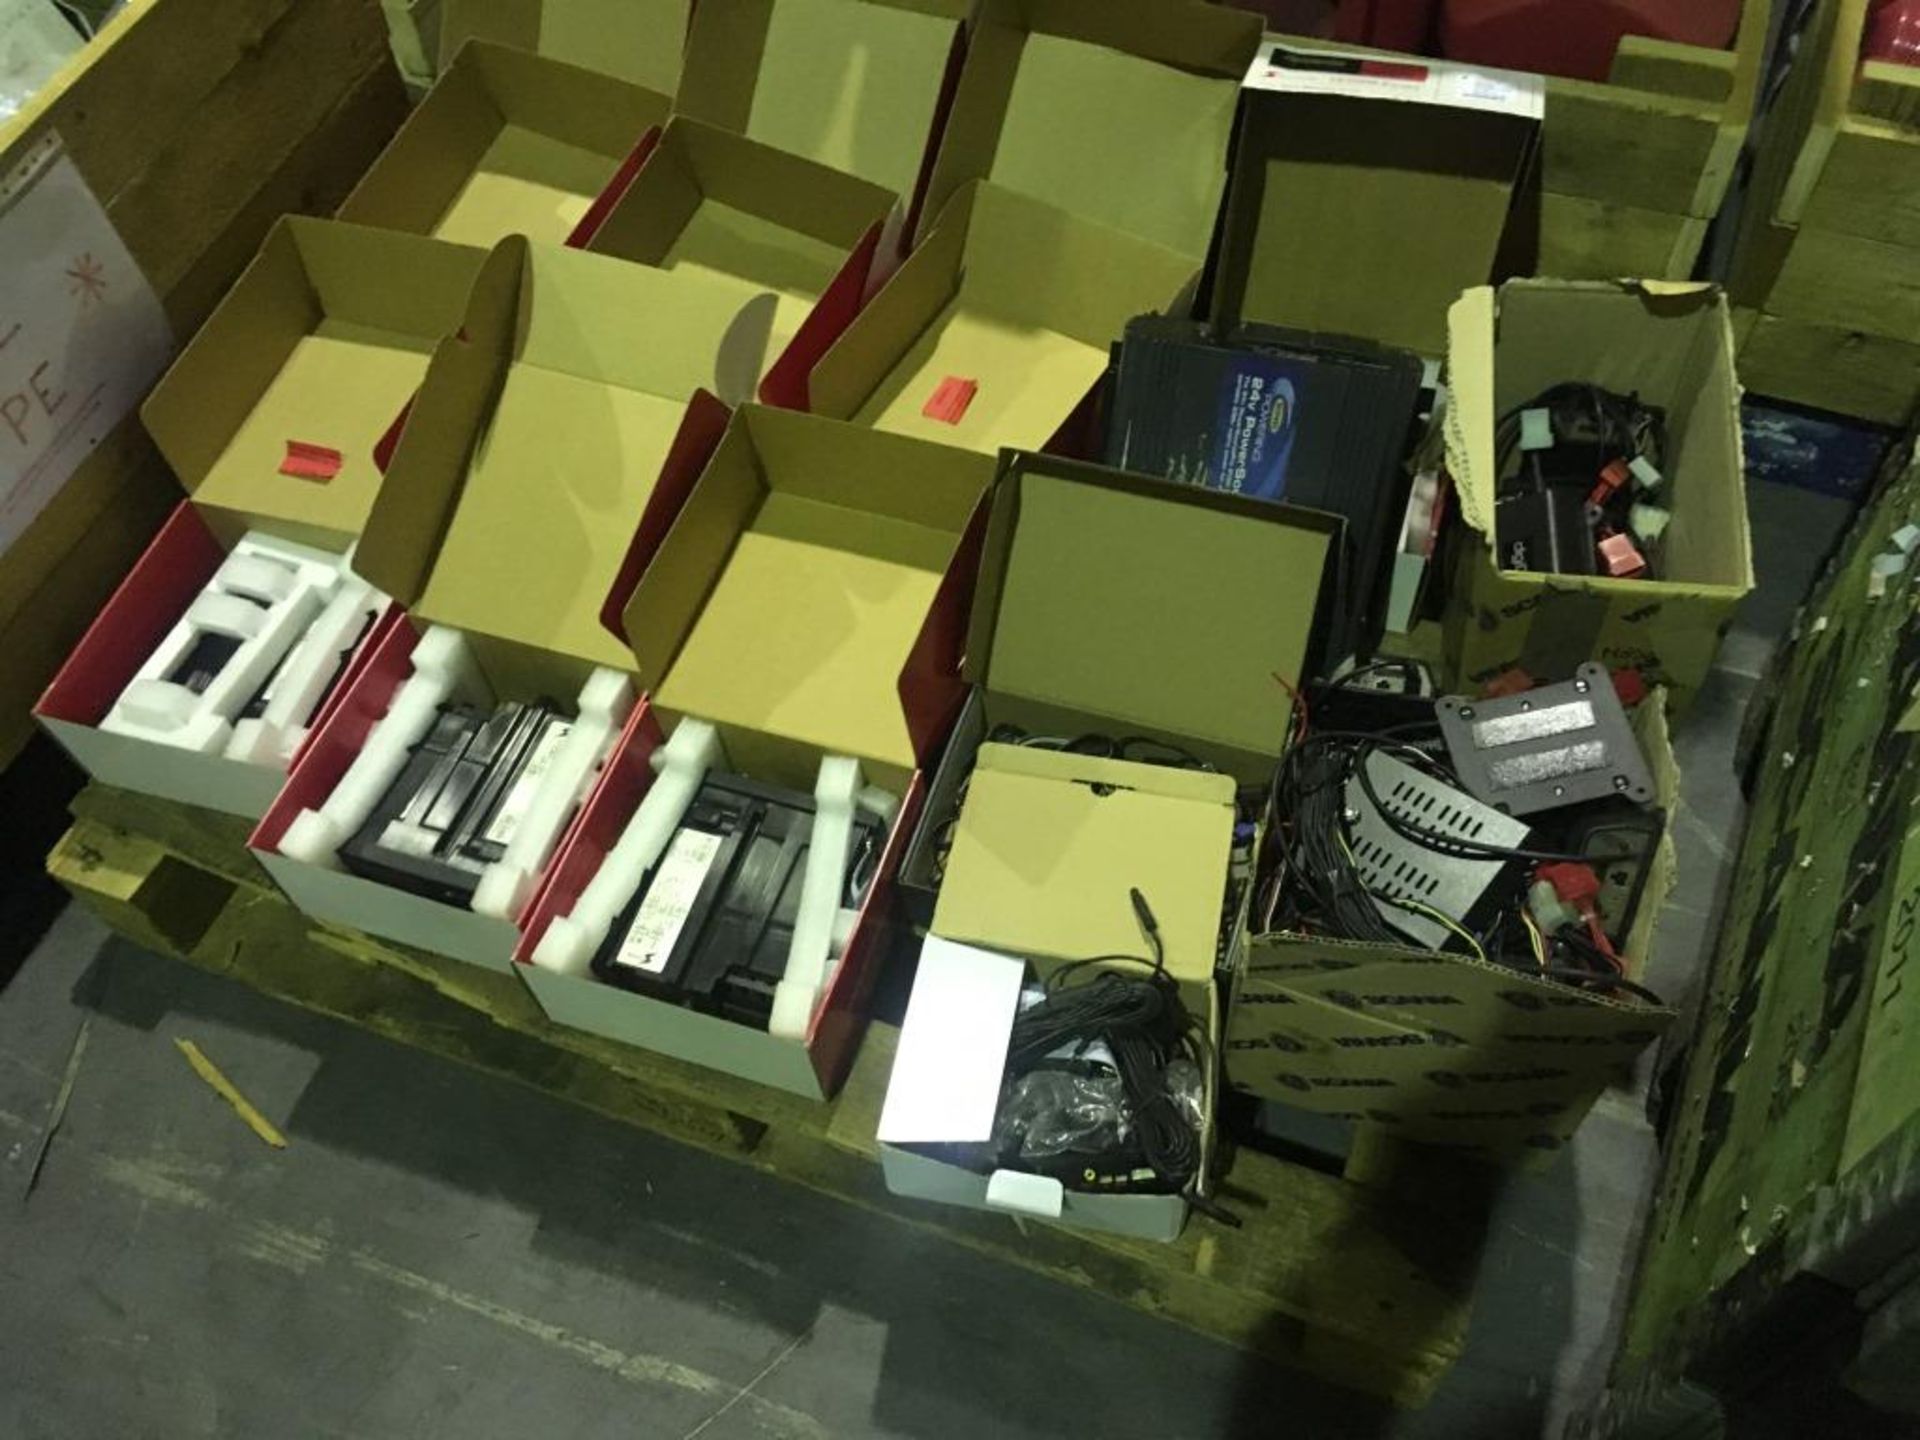 A quantity of cab electronics, radios, chillers and microwaves (some known to be faulty) on three